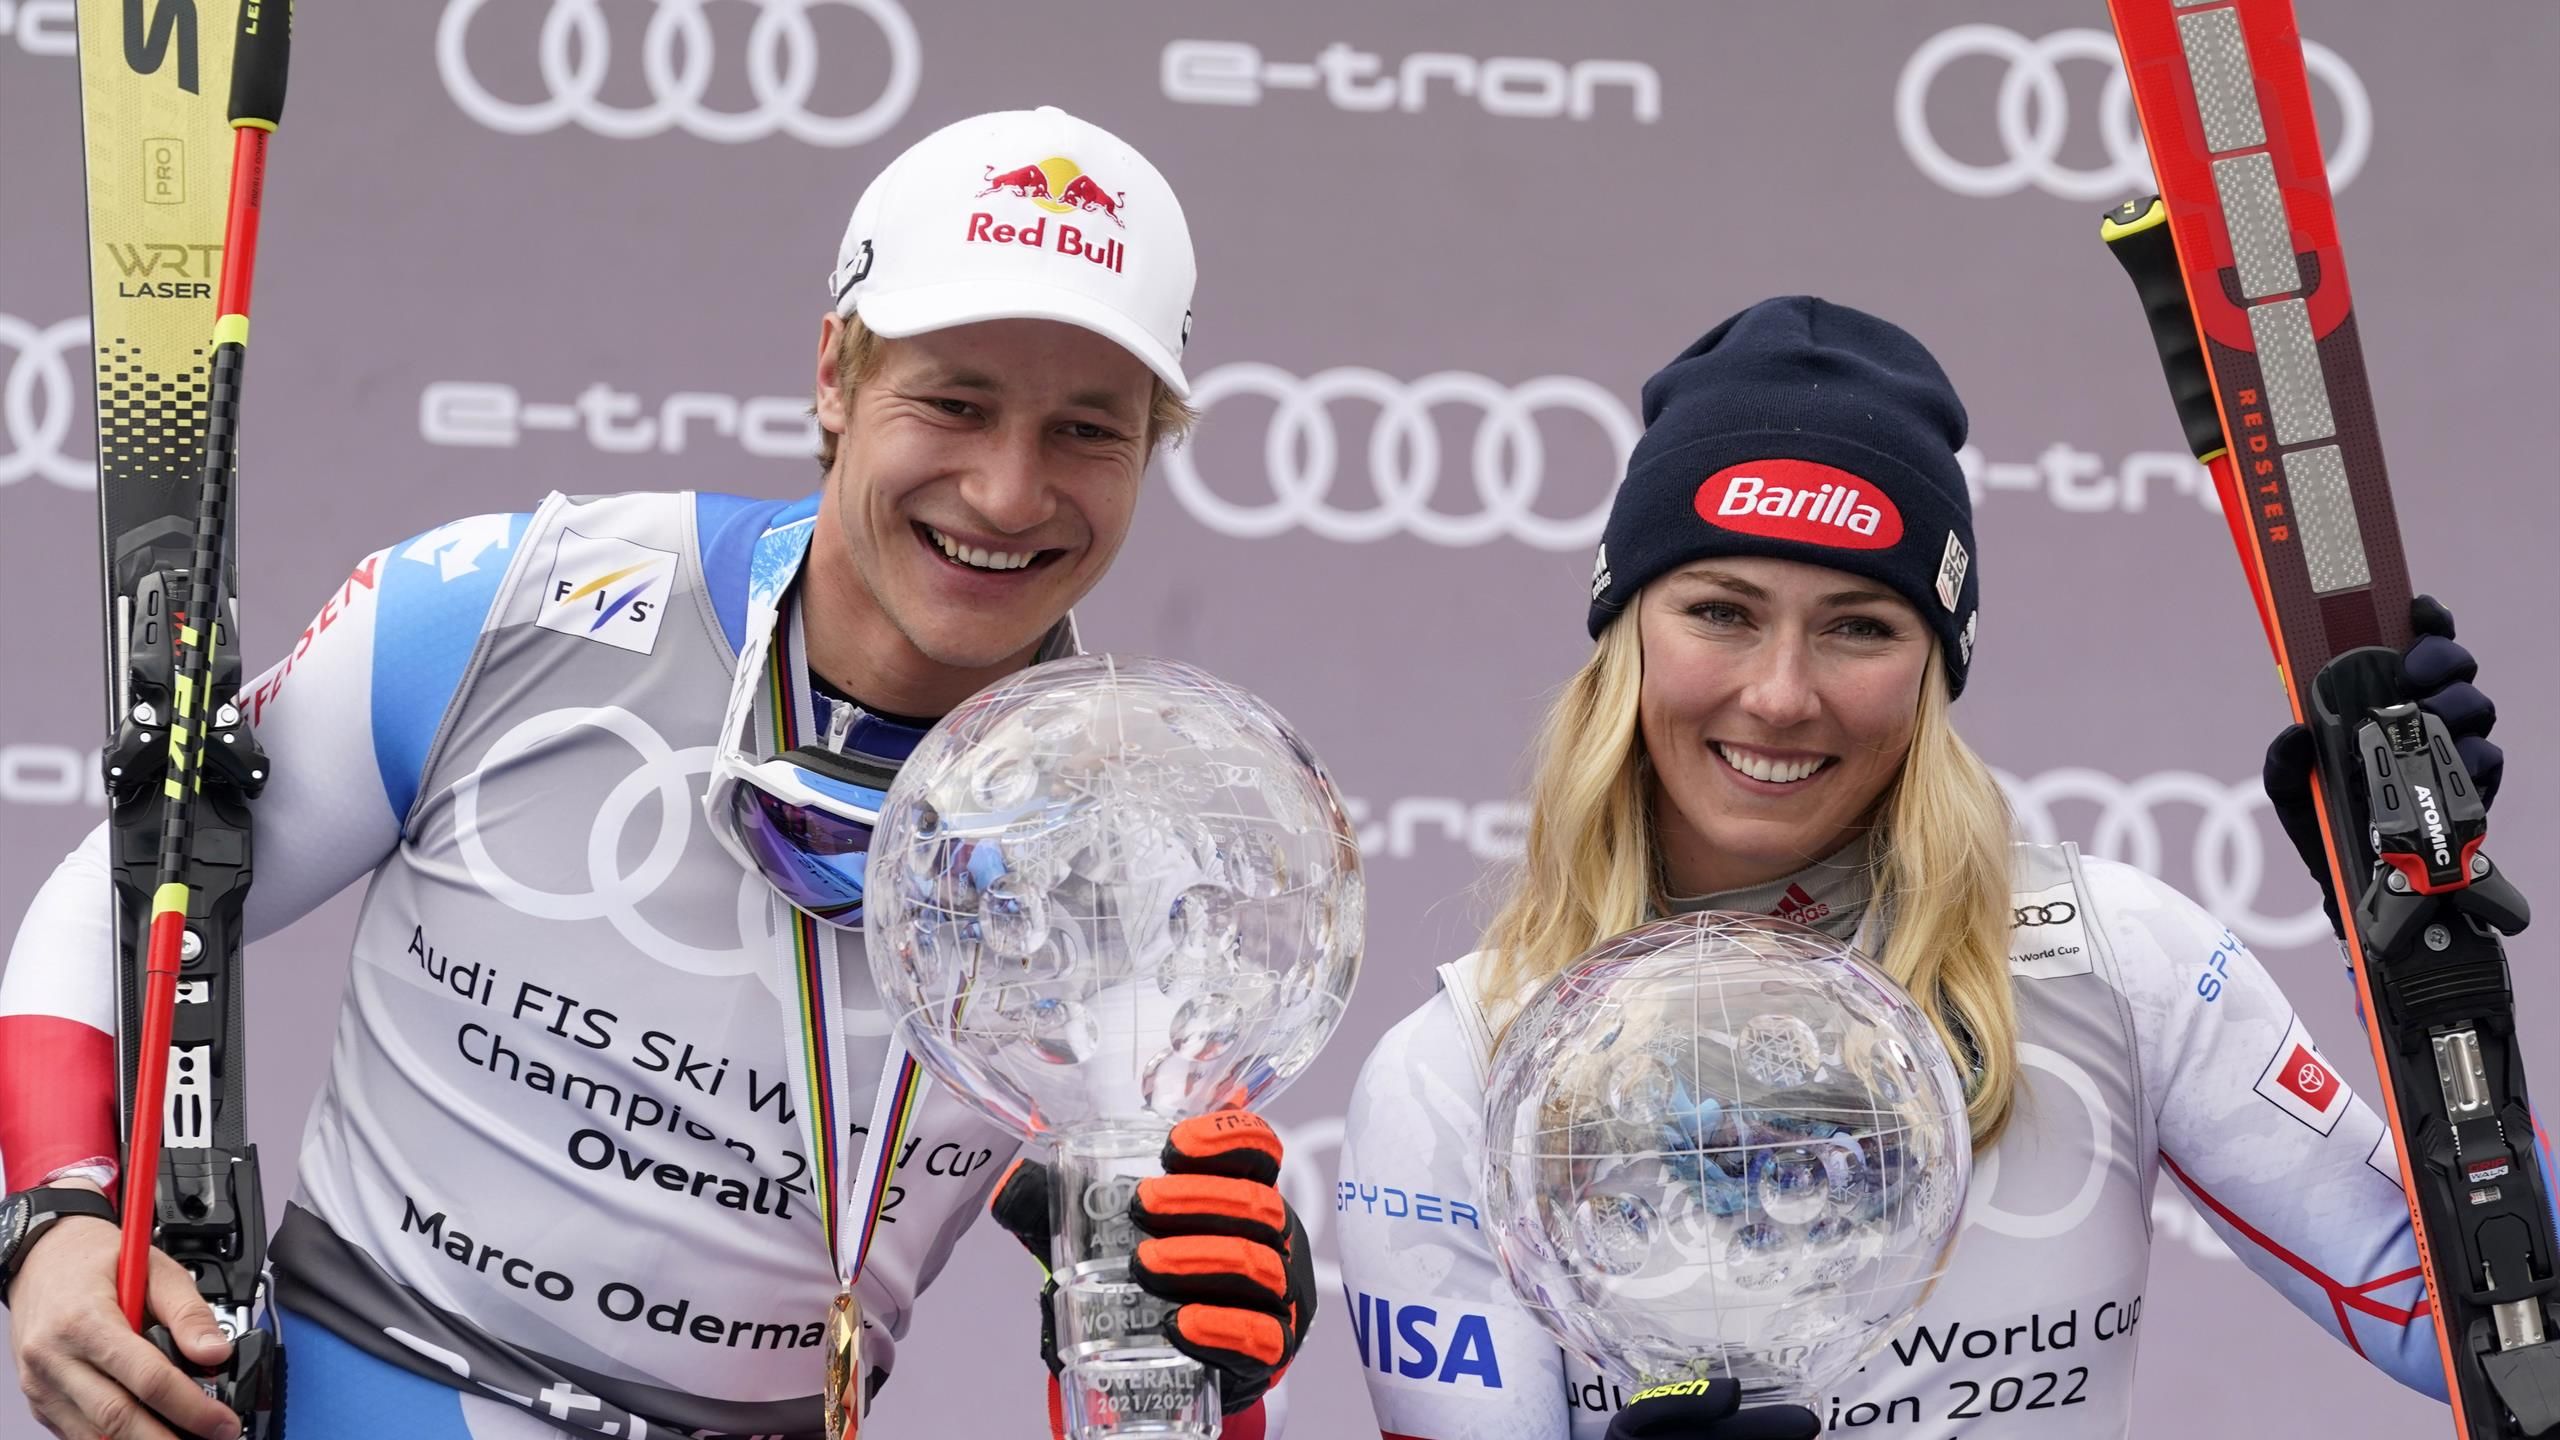 How to watch Alpine Ski World Cup, live stream details, schedule with Mikaela Shiffrin and Marco Odermatt in action